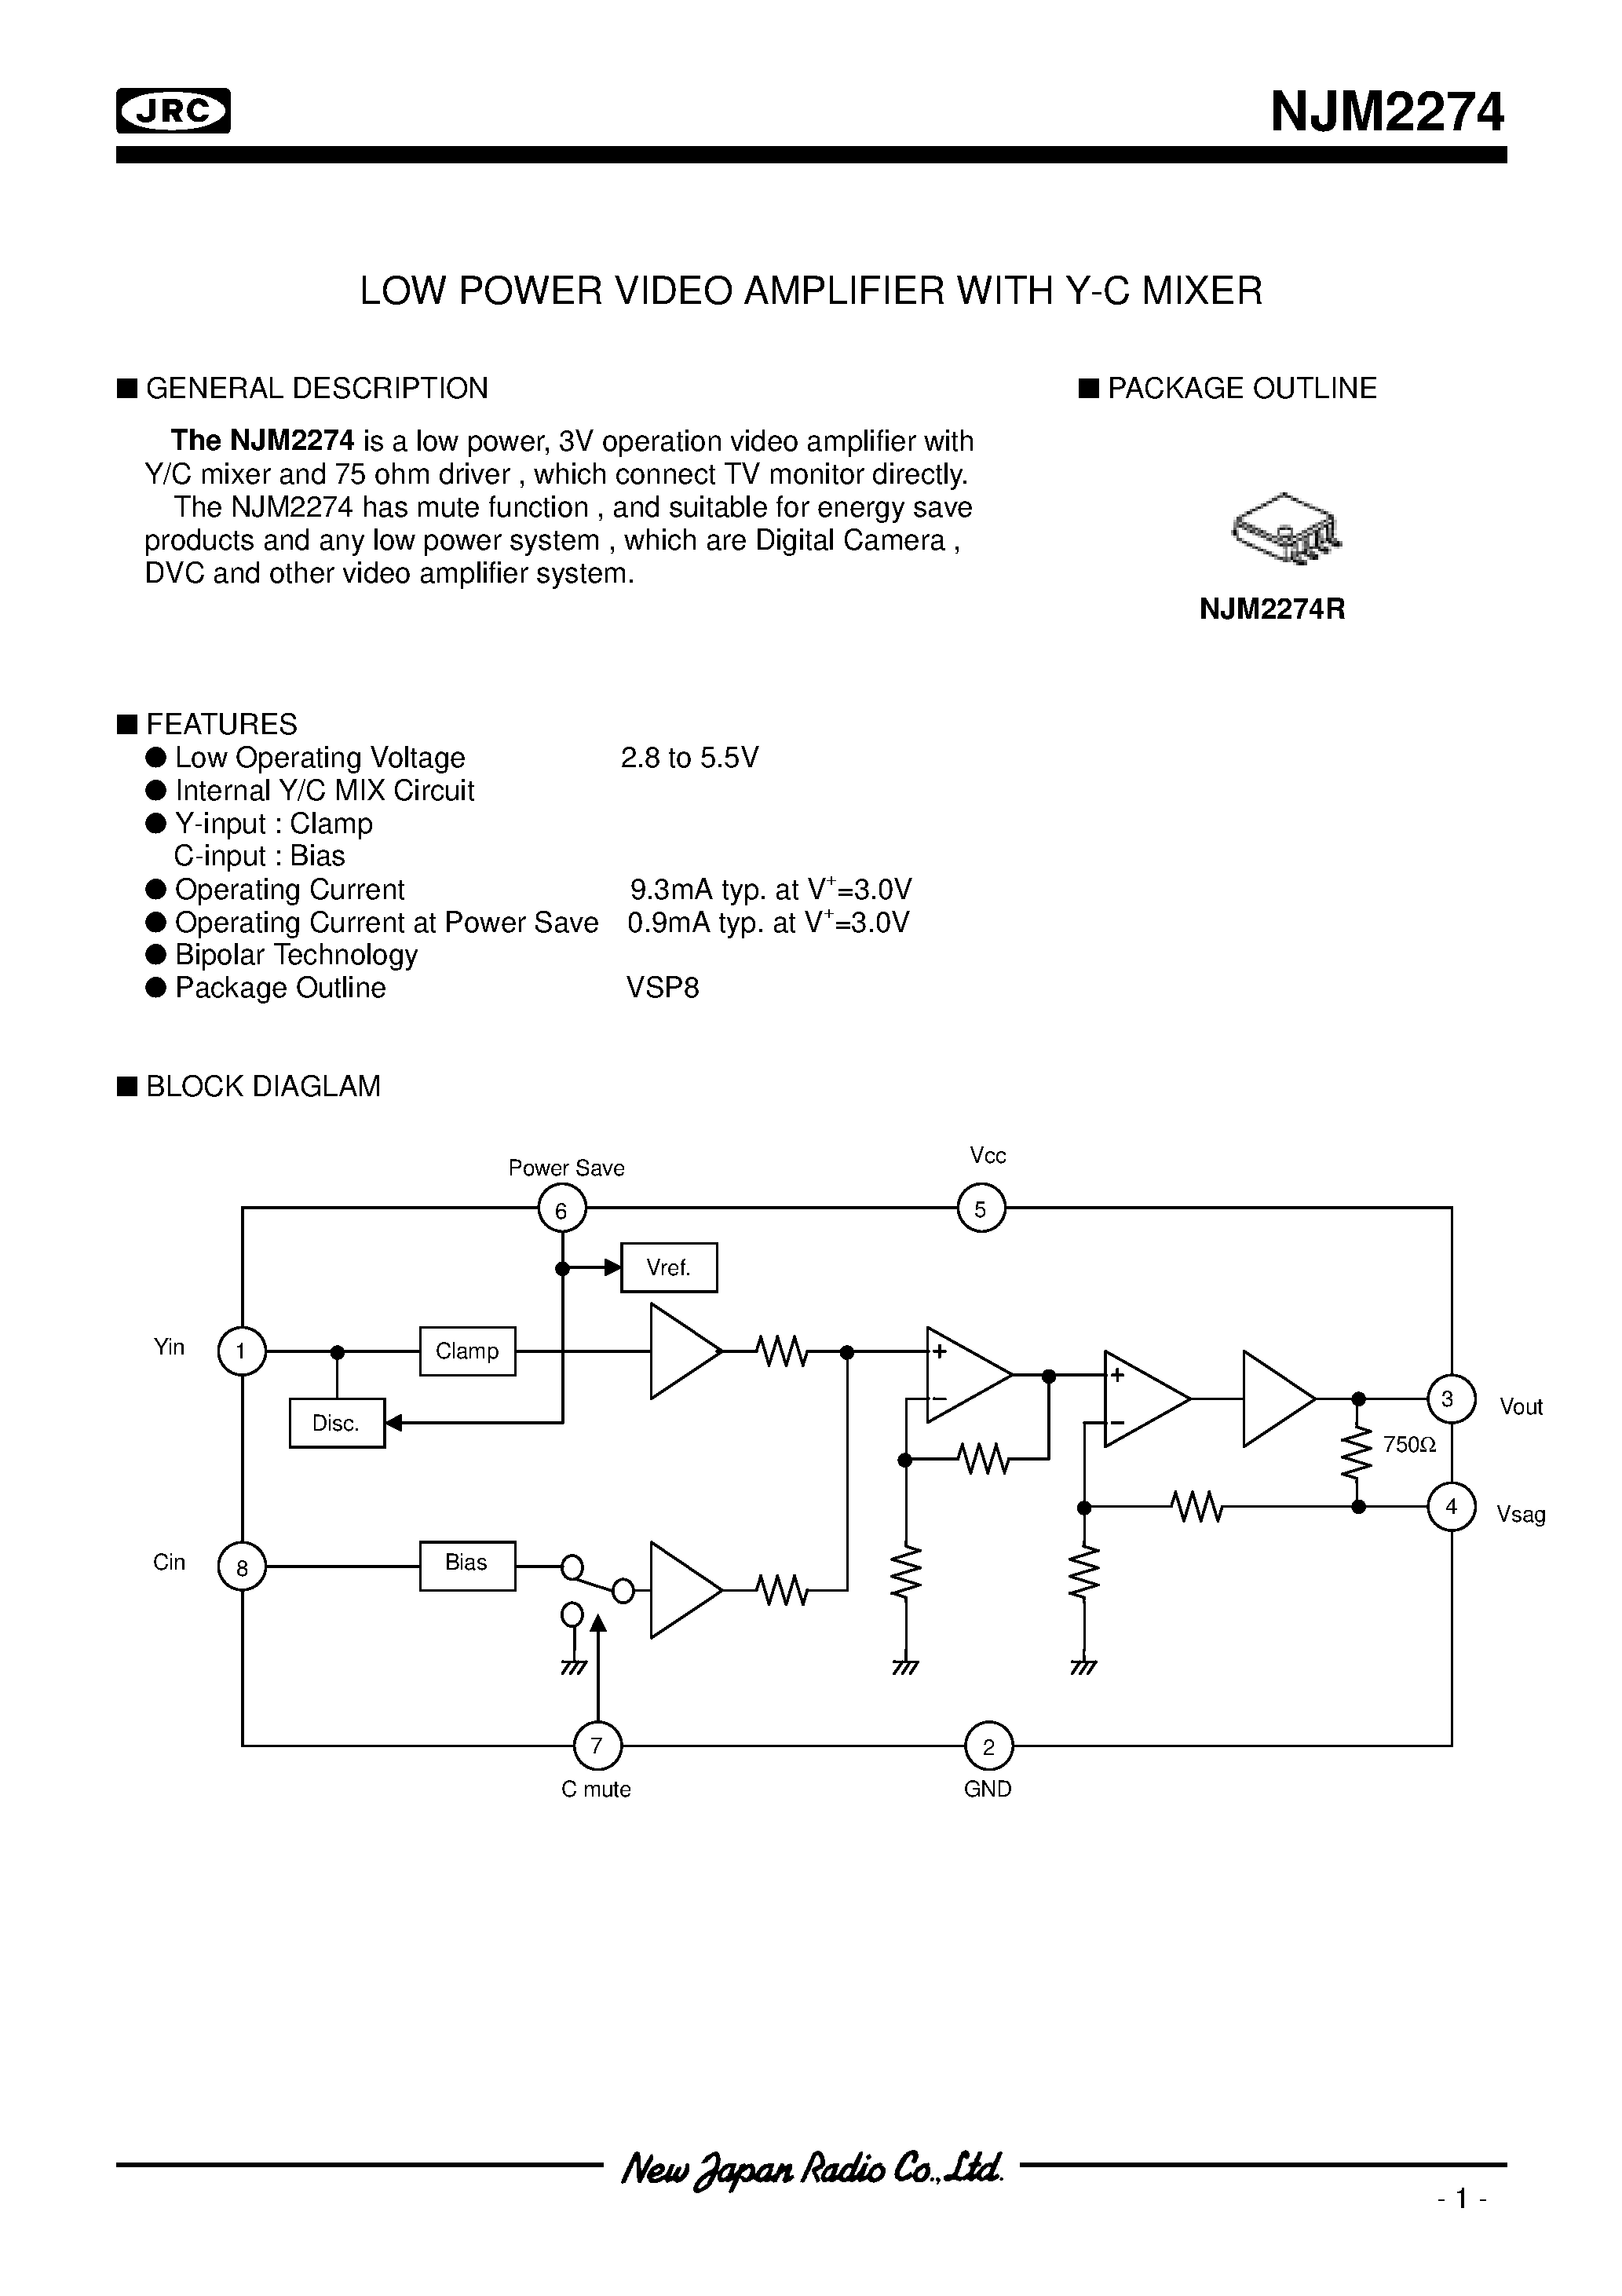 Datasheet NJM2274 - LOW POWER VIDEO AMPLIFIER WITH Y-C MIXER page 1